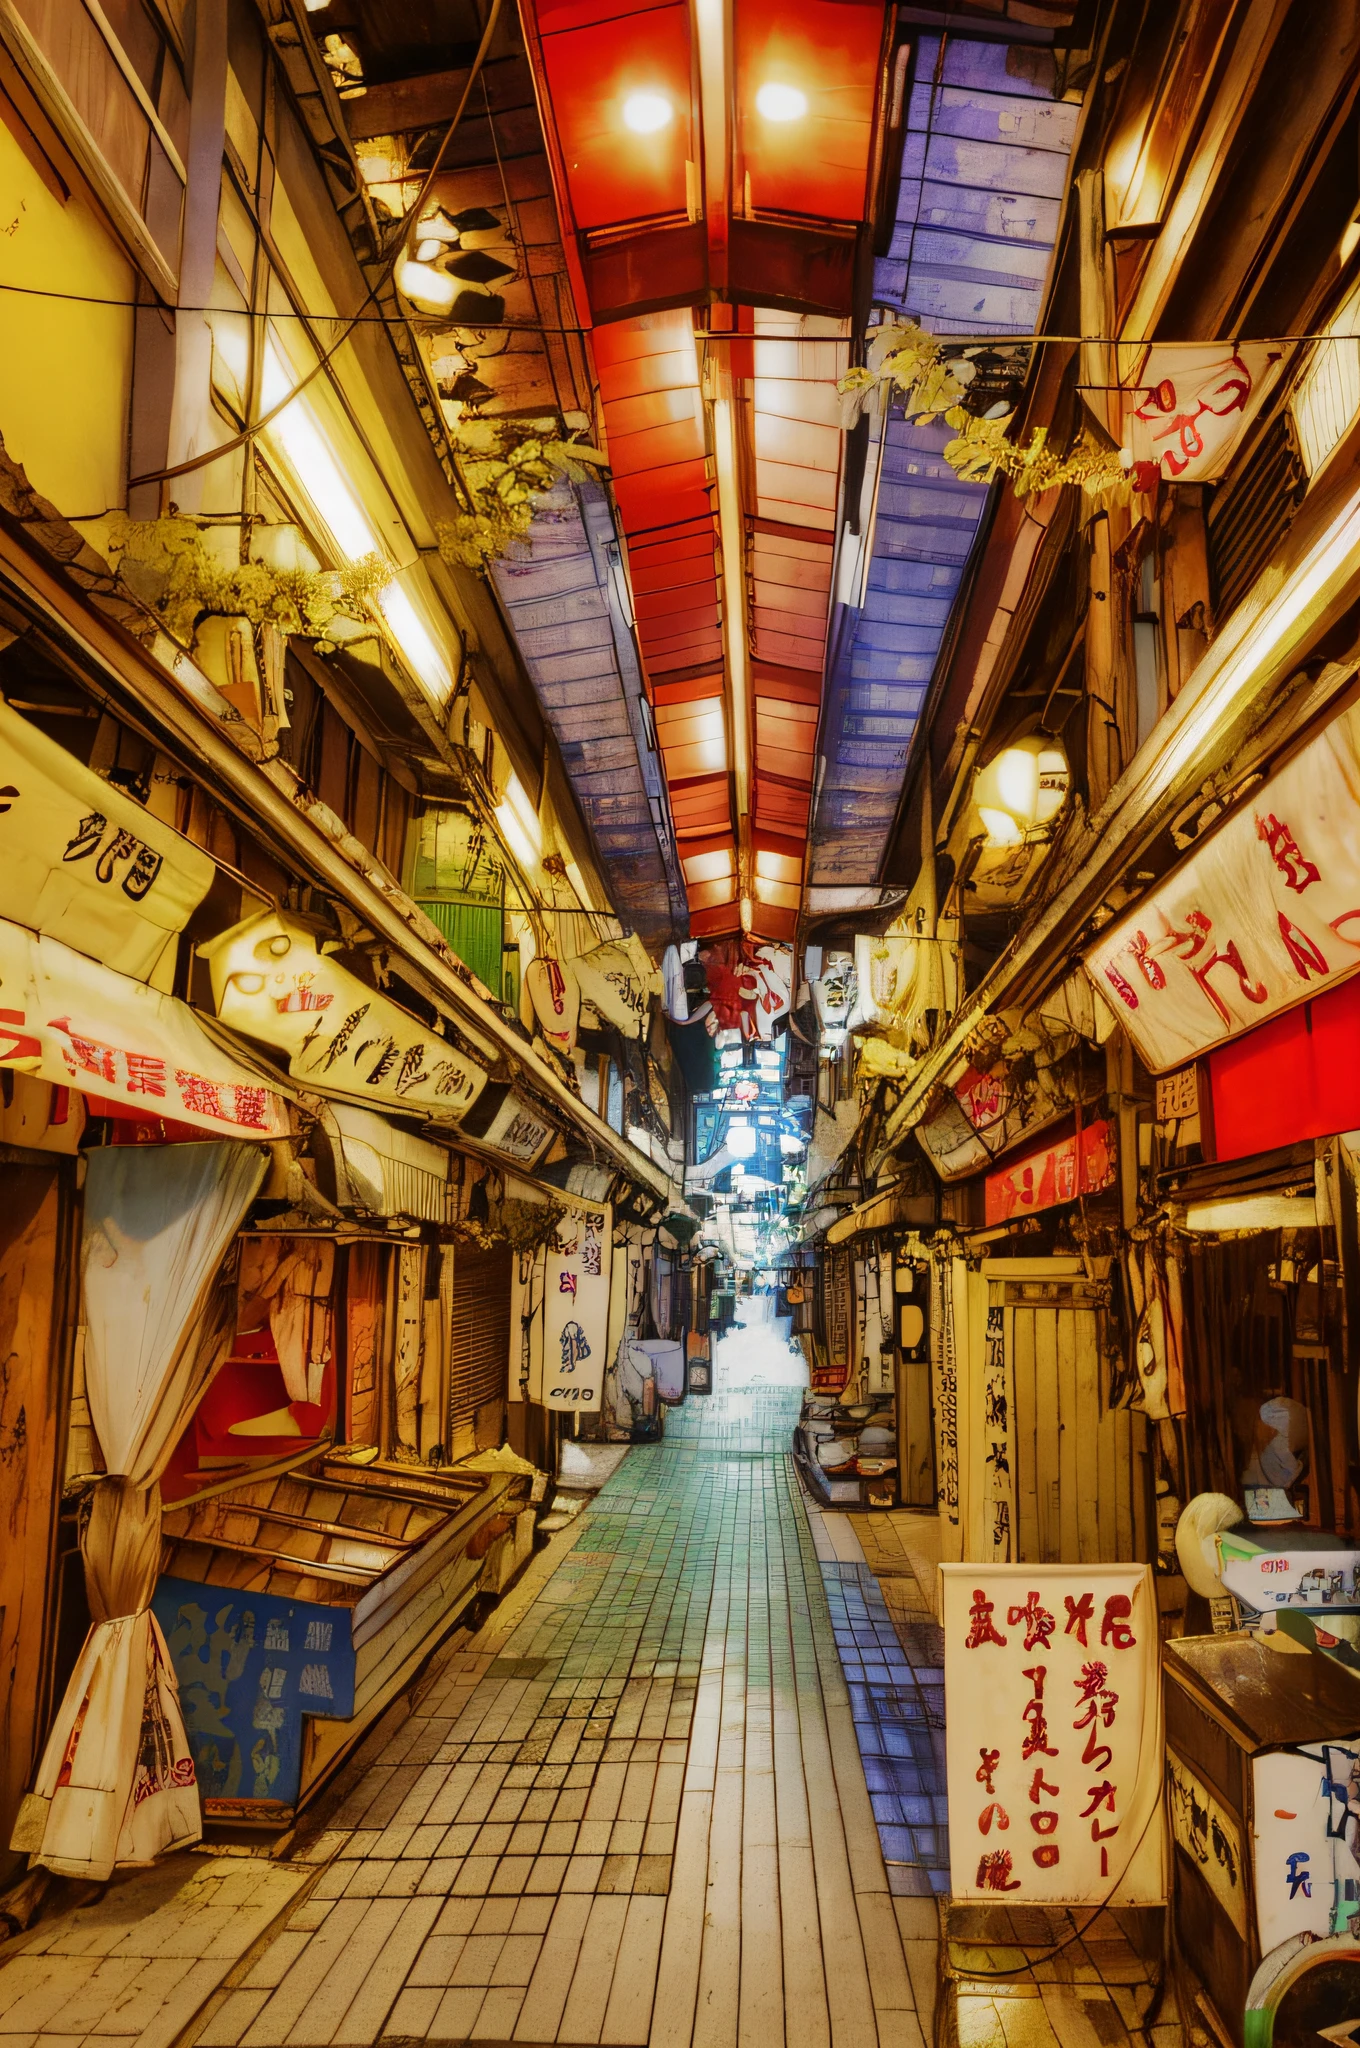 there are many signs hanging from the ceiling in this Marché, old rue japonaise Marché, Marché in japan, wet Marché street, Marché, Jonque déserte de Shinjuku, Jonque déserte de Shinjuku town, Okinawa Japon, ruelle de Tokyo, the vibrant echoes of the Marché, rue japonaise, Marché setting, centre ville japonais, fish Marché stalls, sakimichan hdri